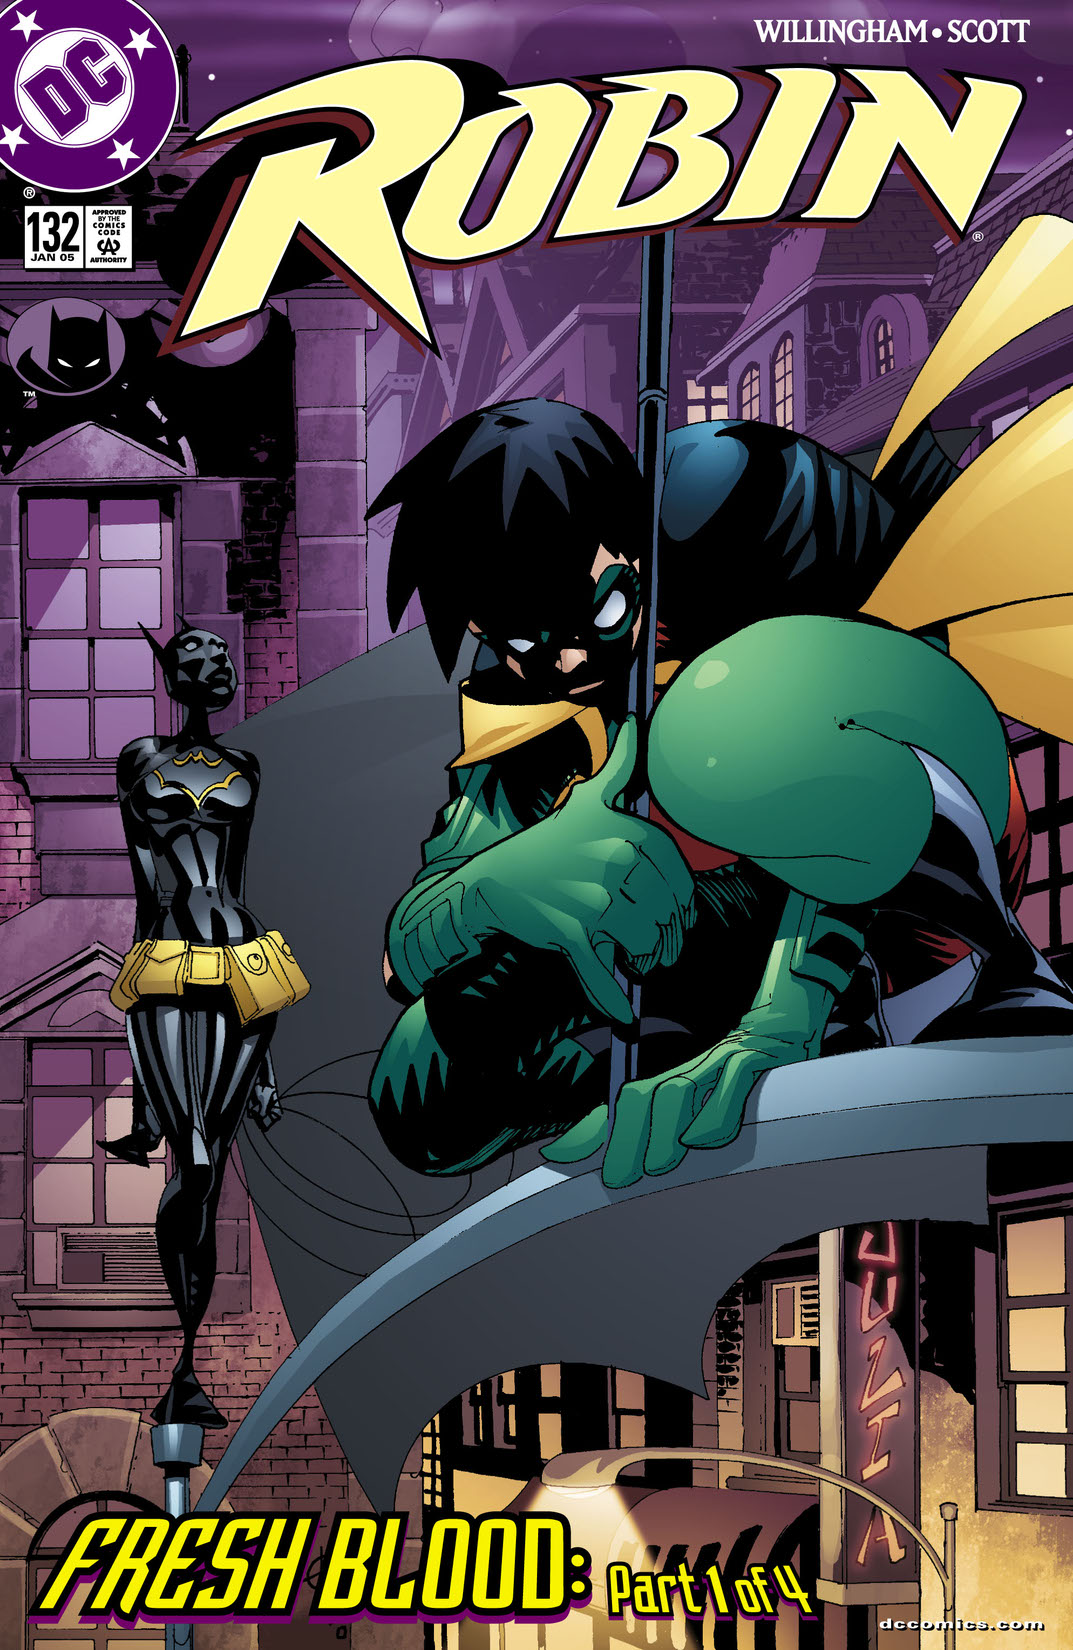 Robin (1993-) #132 preview images